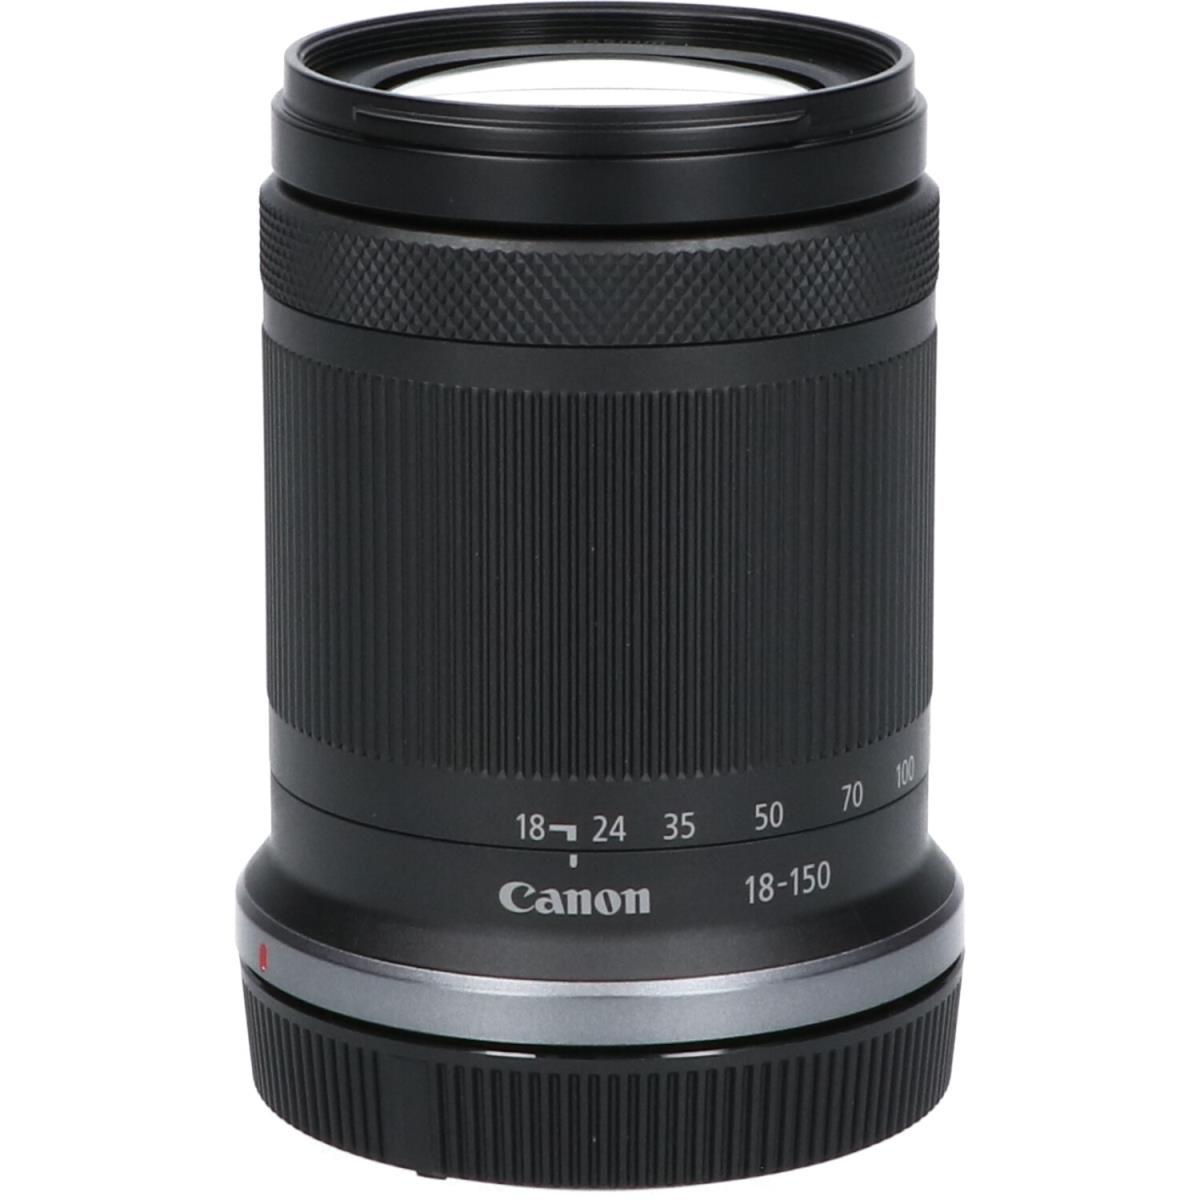 CANON RF-S18-150mm F3.5-6.3IS STM